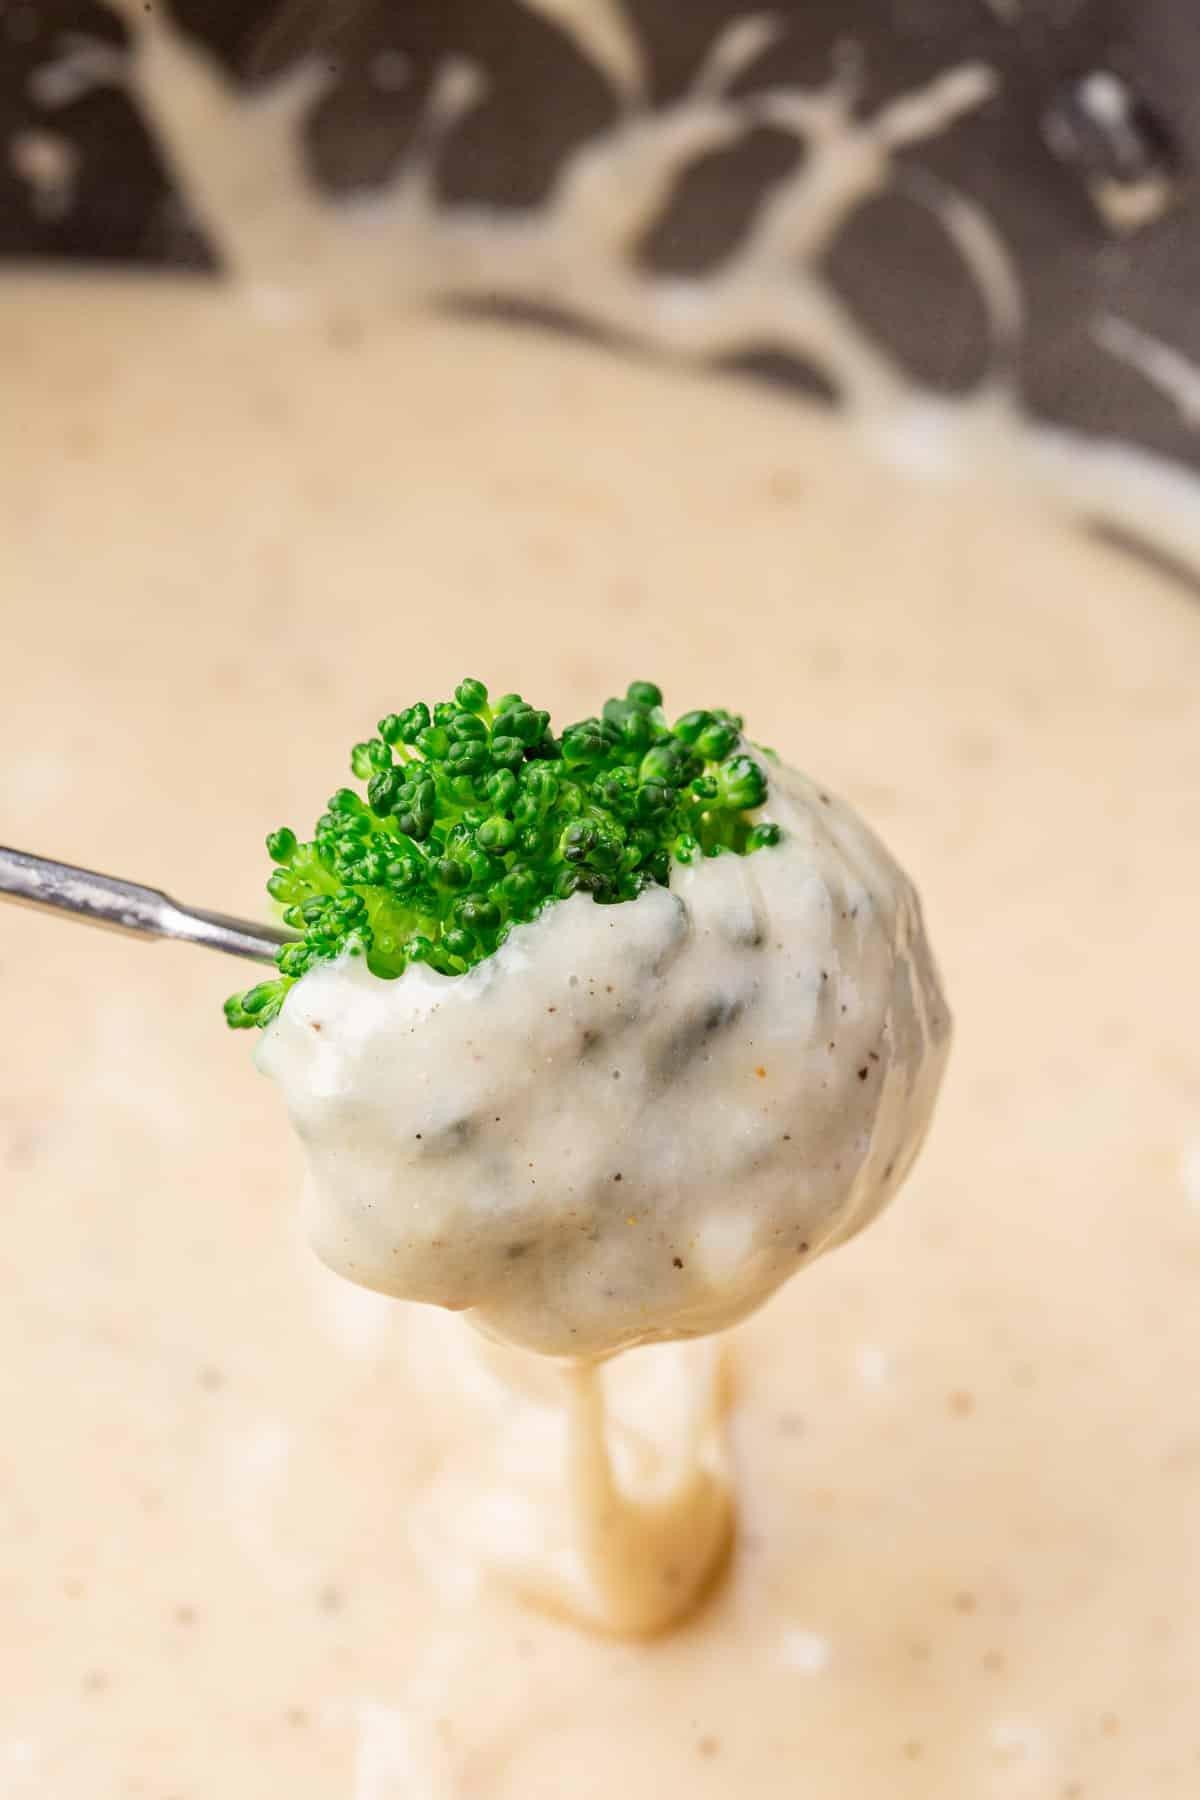 A skewered piece of broccoli covered in gluten-free cheese fondue that is dripping into the fondue pot.